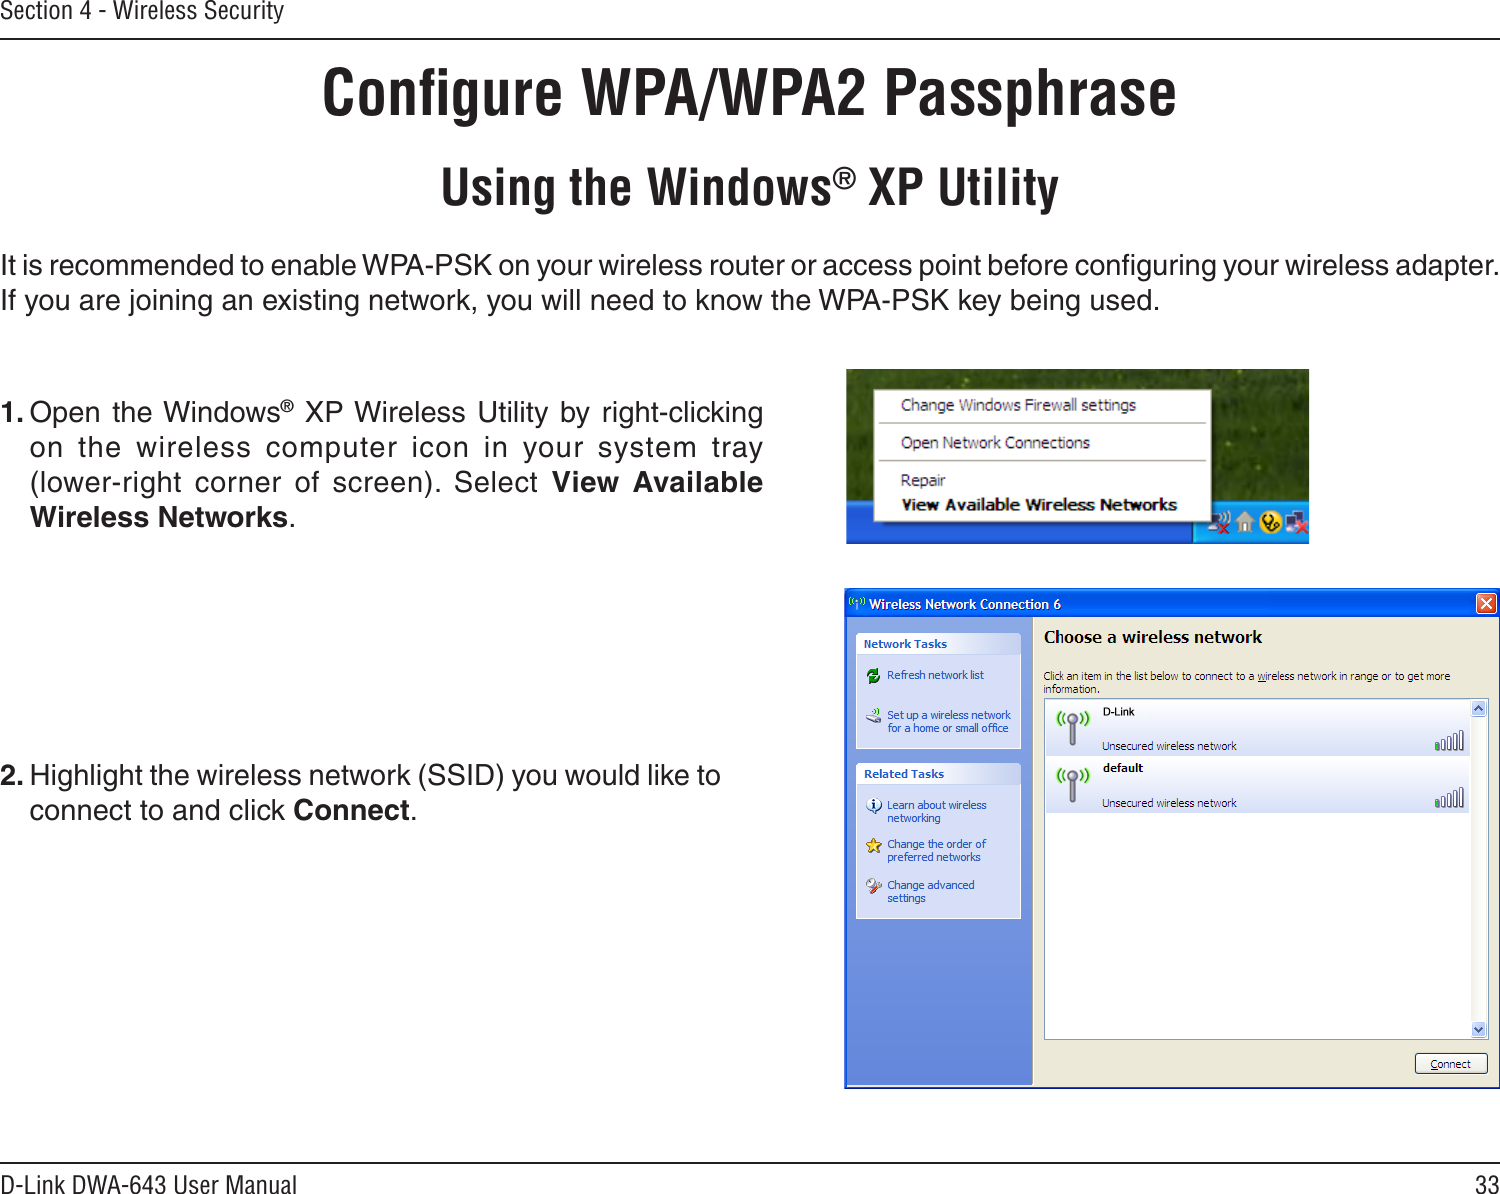 33D-Link DWA-643 User ManualSection 4 - Wireless SecurityConﬁgure WPA/WPA2 PassphraseUsing the Windows® XP UtilityIt is recommended to enable WPA-PSK on your wireless router or access point before conﬁguring your wireless adapter. If you are joining an existing network, you will need to know the WPA-PSK key being used.2. Highlight the wireless network (SSID) you would like to connect to and click Connect.1. Open the Windows®  XP Wireless Utility by right-clicking on  the  wireless  computer  icon  in  your  system  tray  (lower-right  corner  of  screen).  Select  View  Available Wireless Networks. 